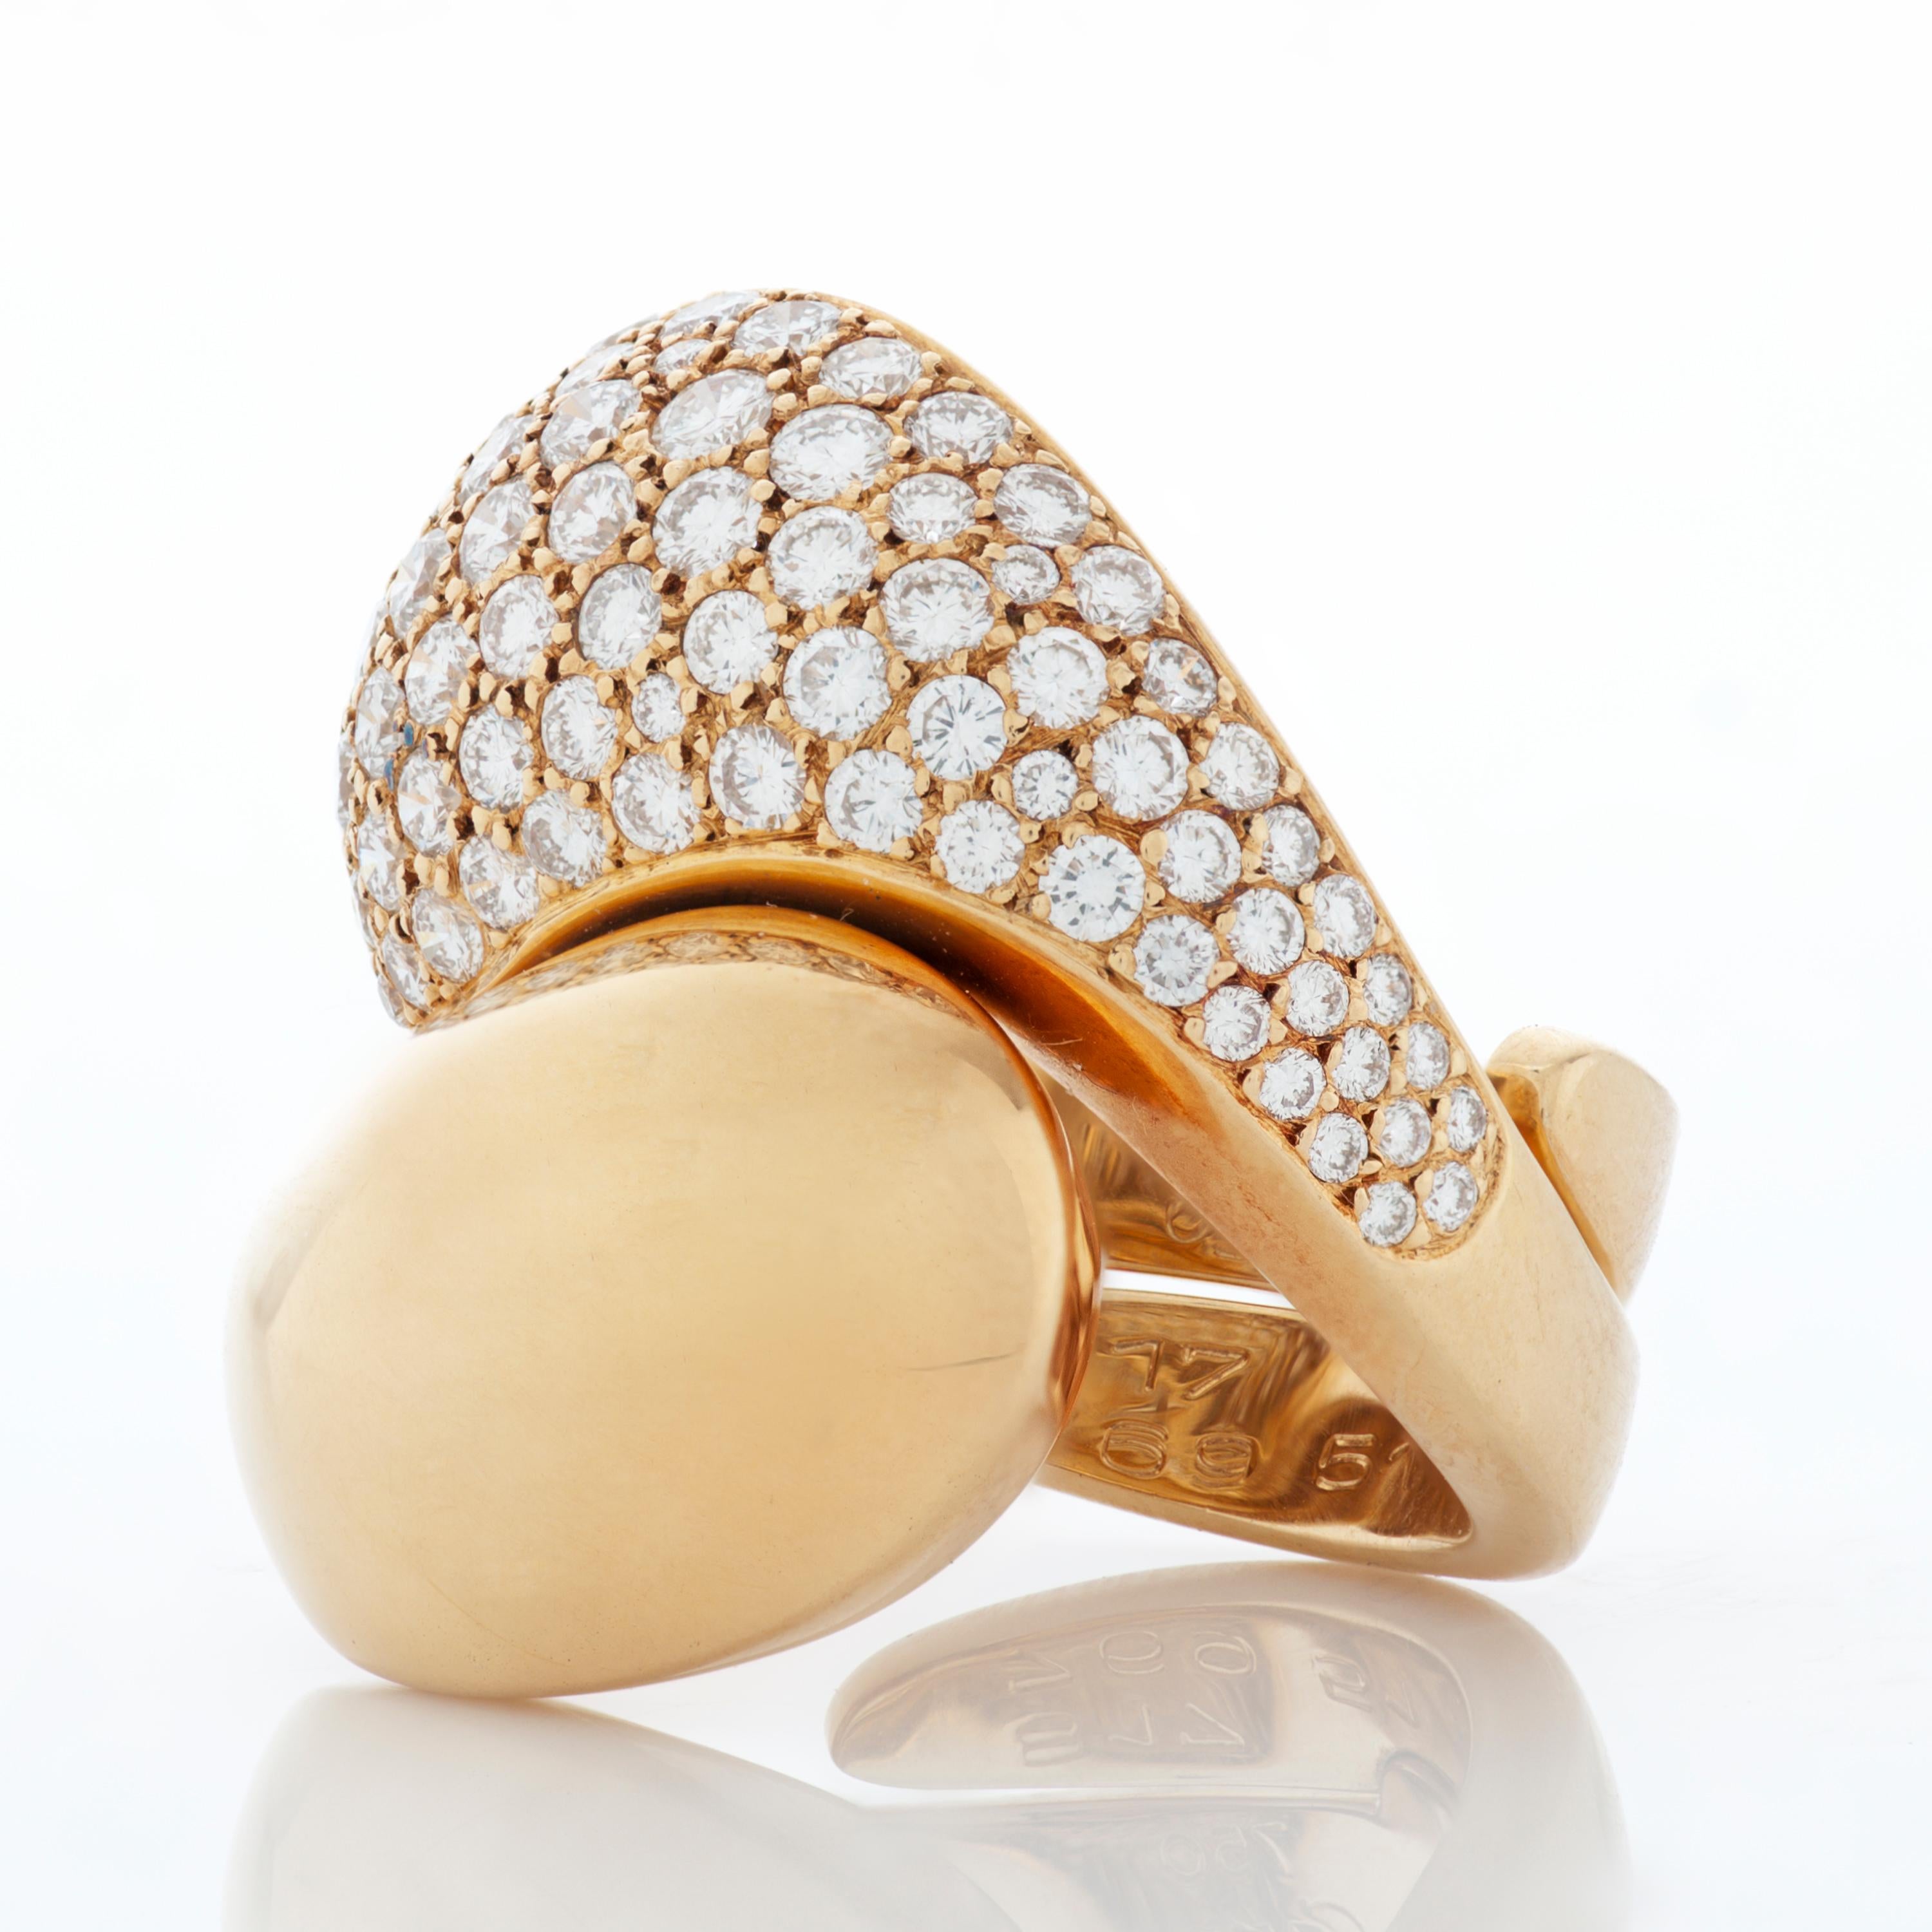 This vintage Cartier bypass ring features approximately 2.80 carat of round brilliant cut diamonds pave set in 18k yellow gold.  

The ring measures approximately 25mm (0.98